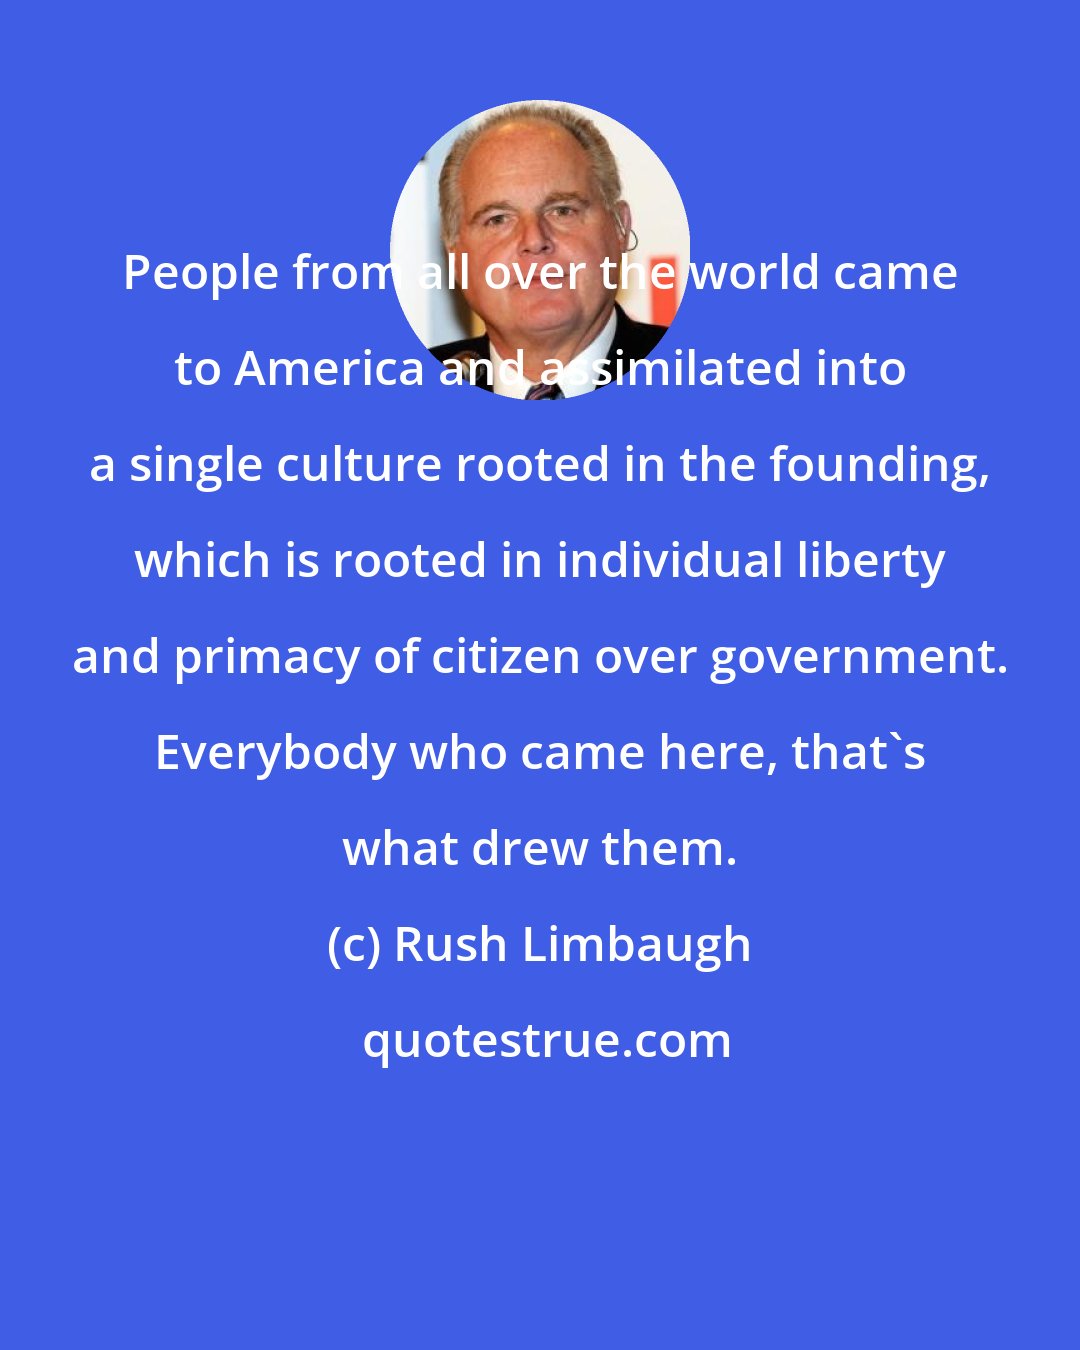 Rush Limbaugh: People from all over the world came to America and assimilated into a single culture rooted in the founding, which is rooted in individual liberty and primacy of citizen over government. Everybody who came here, that's what drew them.